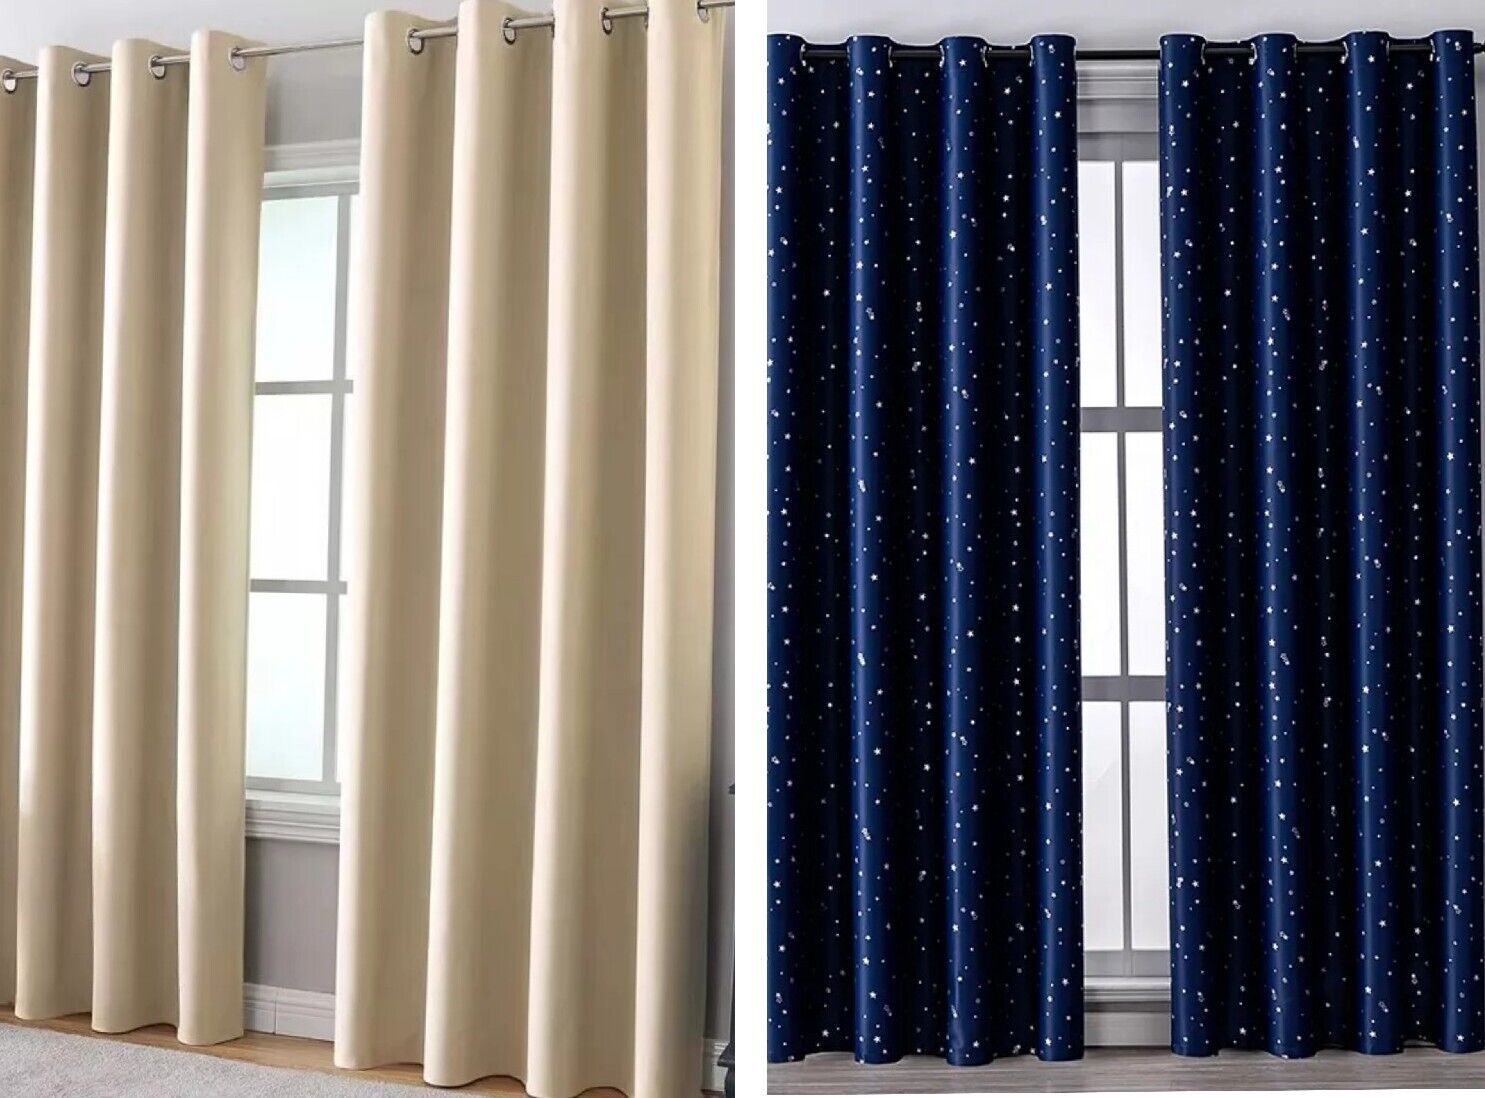 Do curtains save electricity?